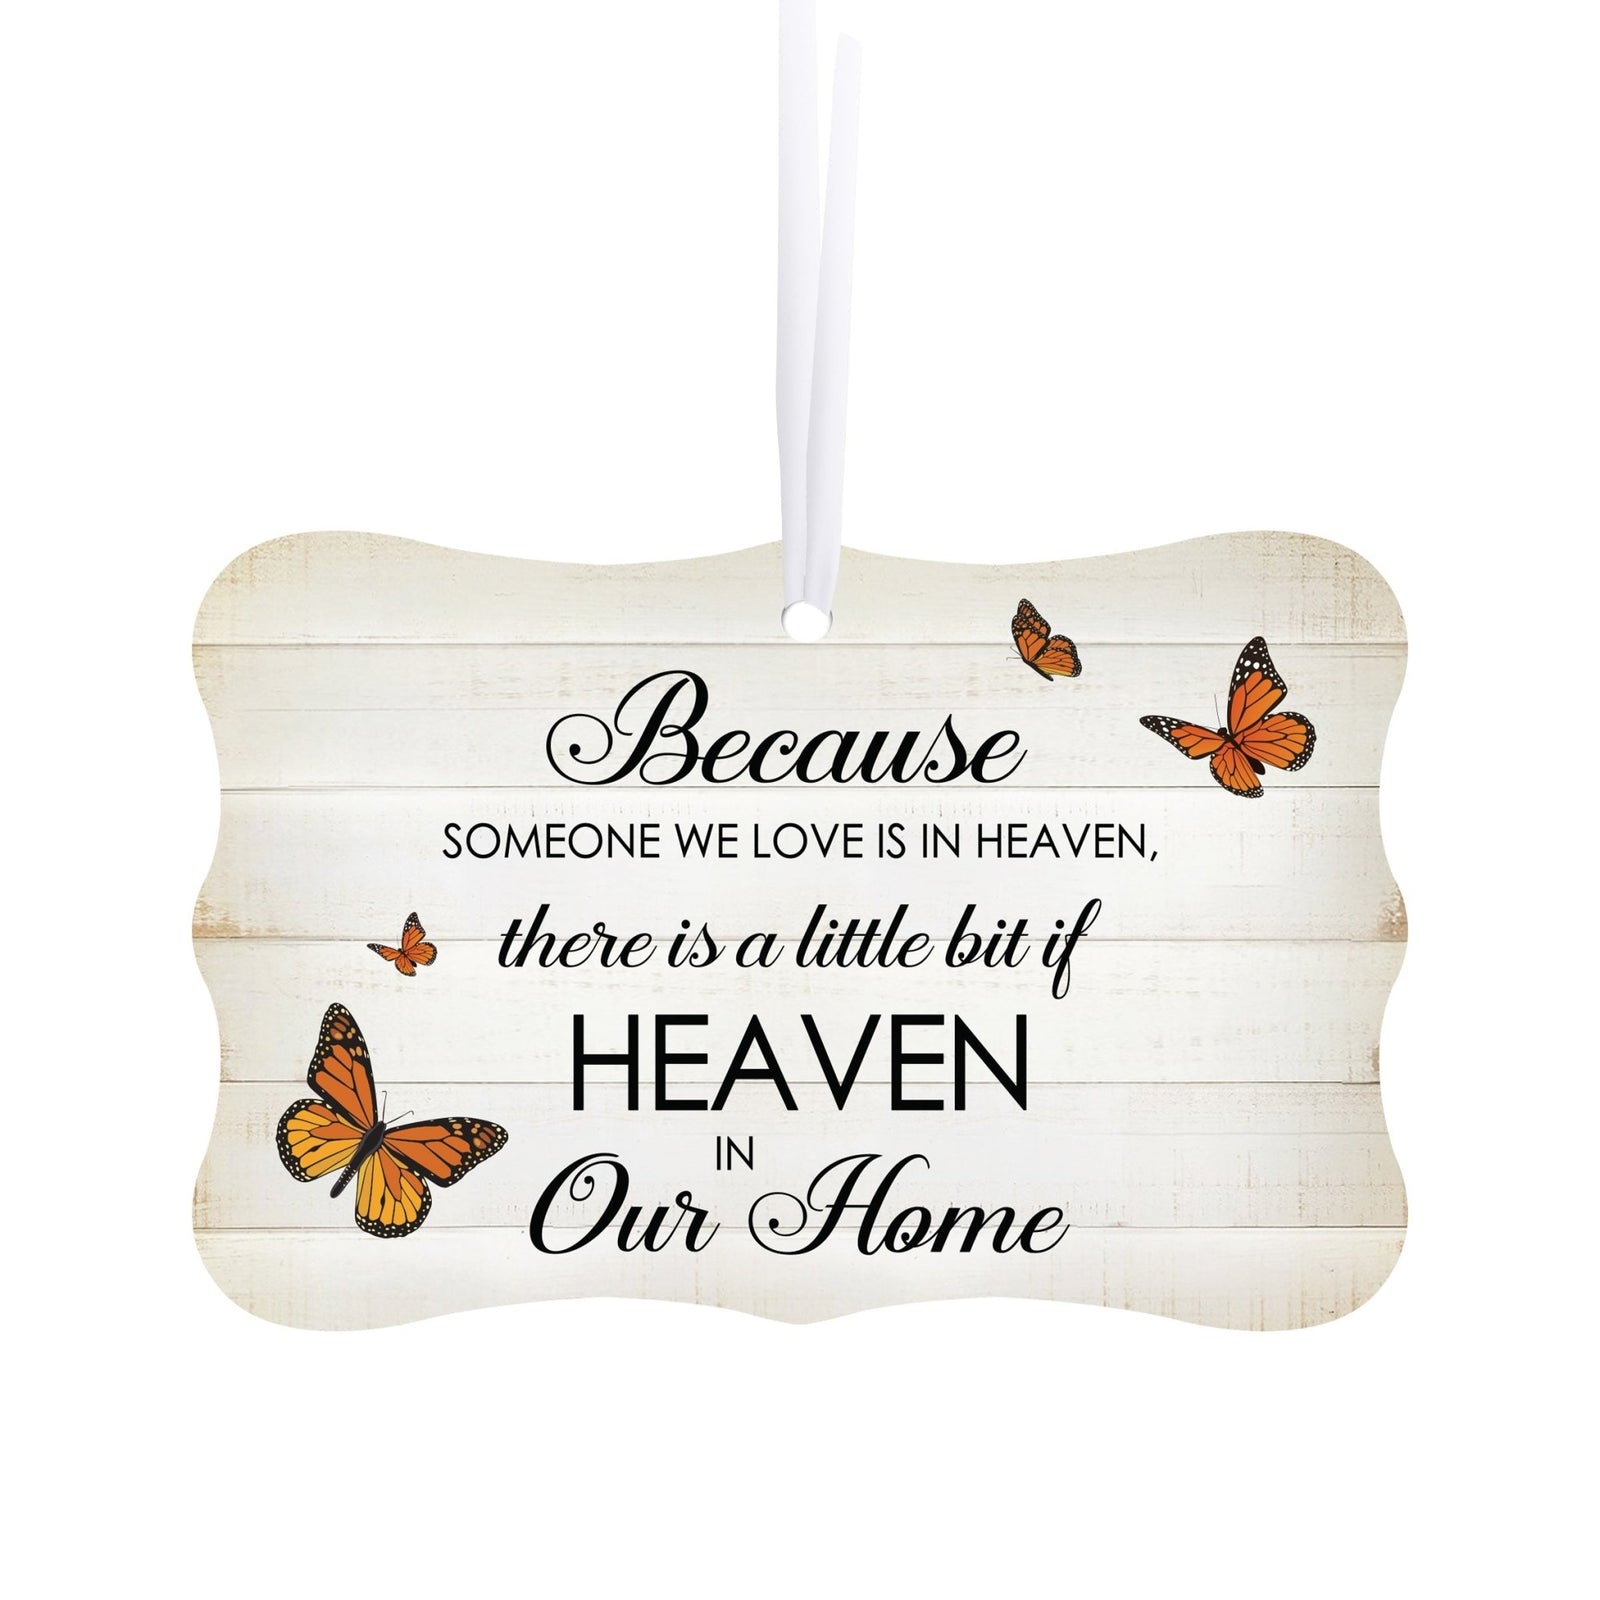 Lifesong Milestones Hanging Memorial White Scalloped Ornament for Loss of Loved One: A beautiful tribute with memorial decorations.